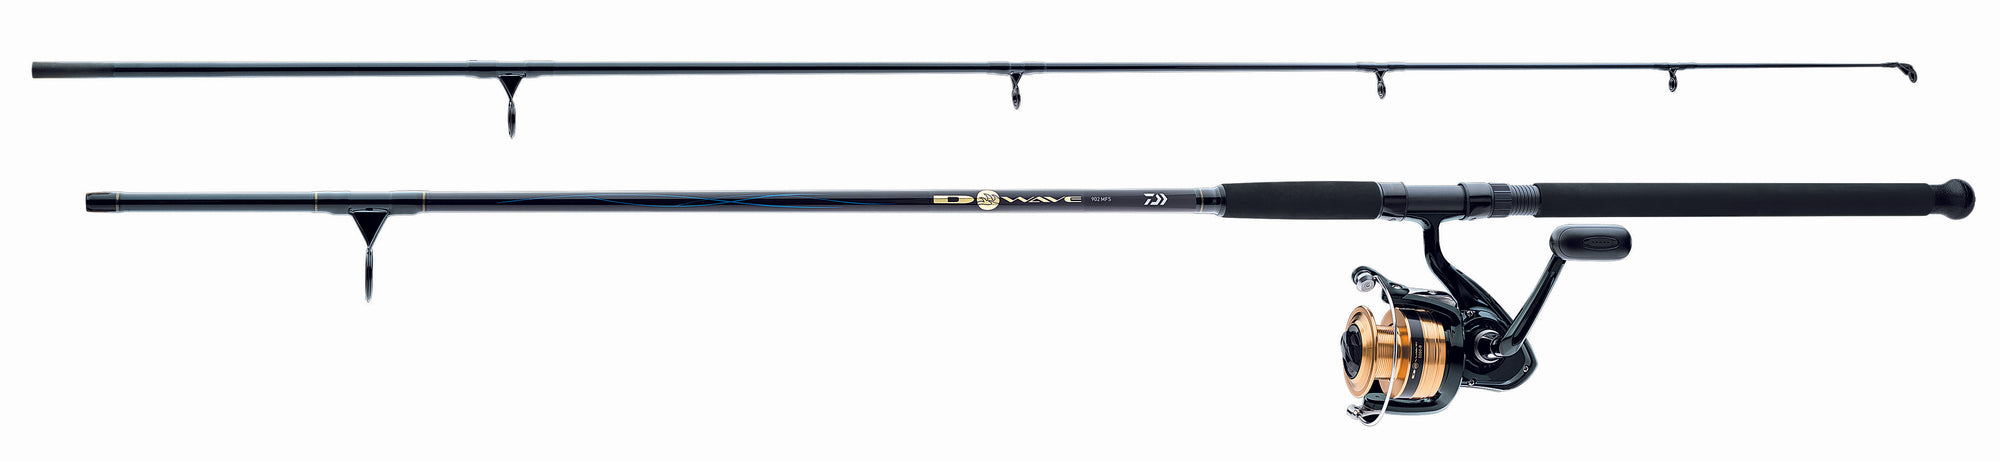 All Saltwater Trolling Combo Saltwater Fishing Rod & Reel Combos